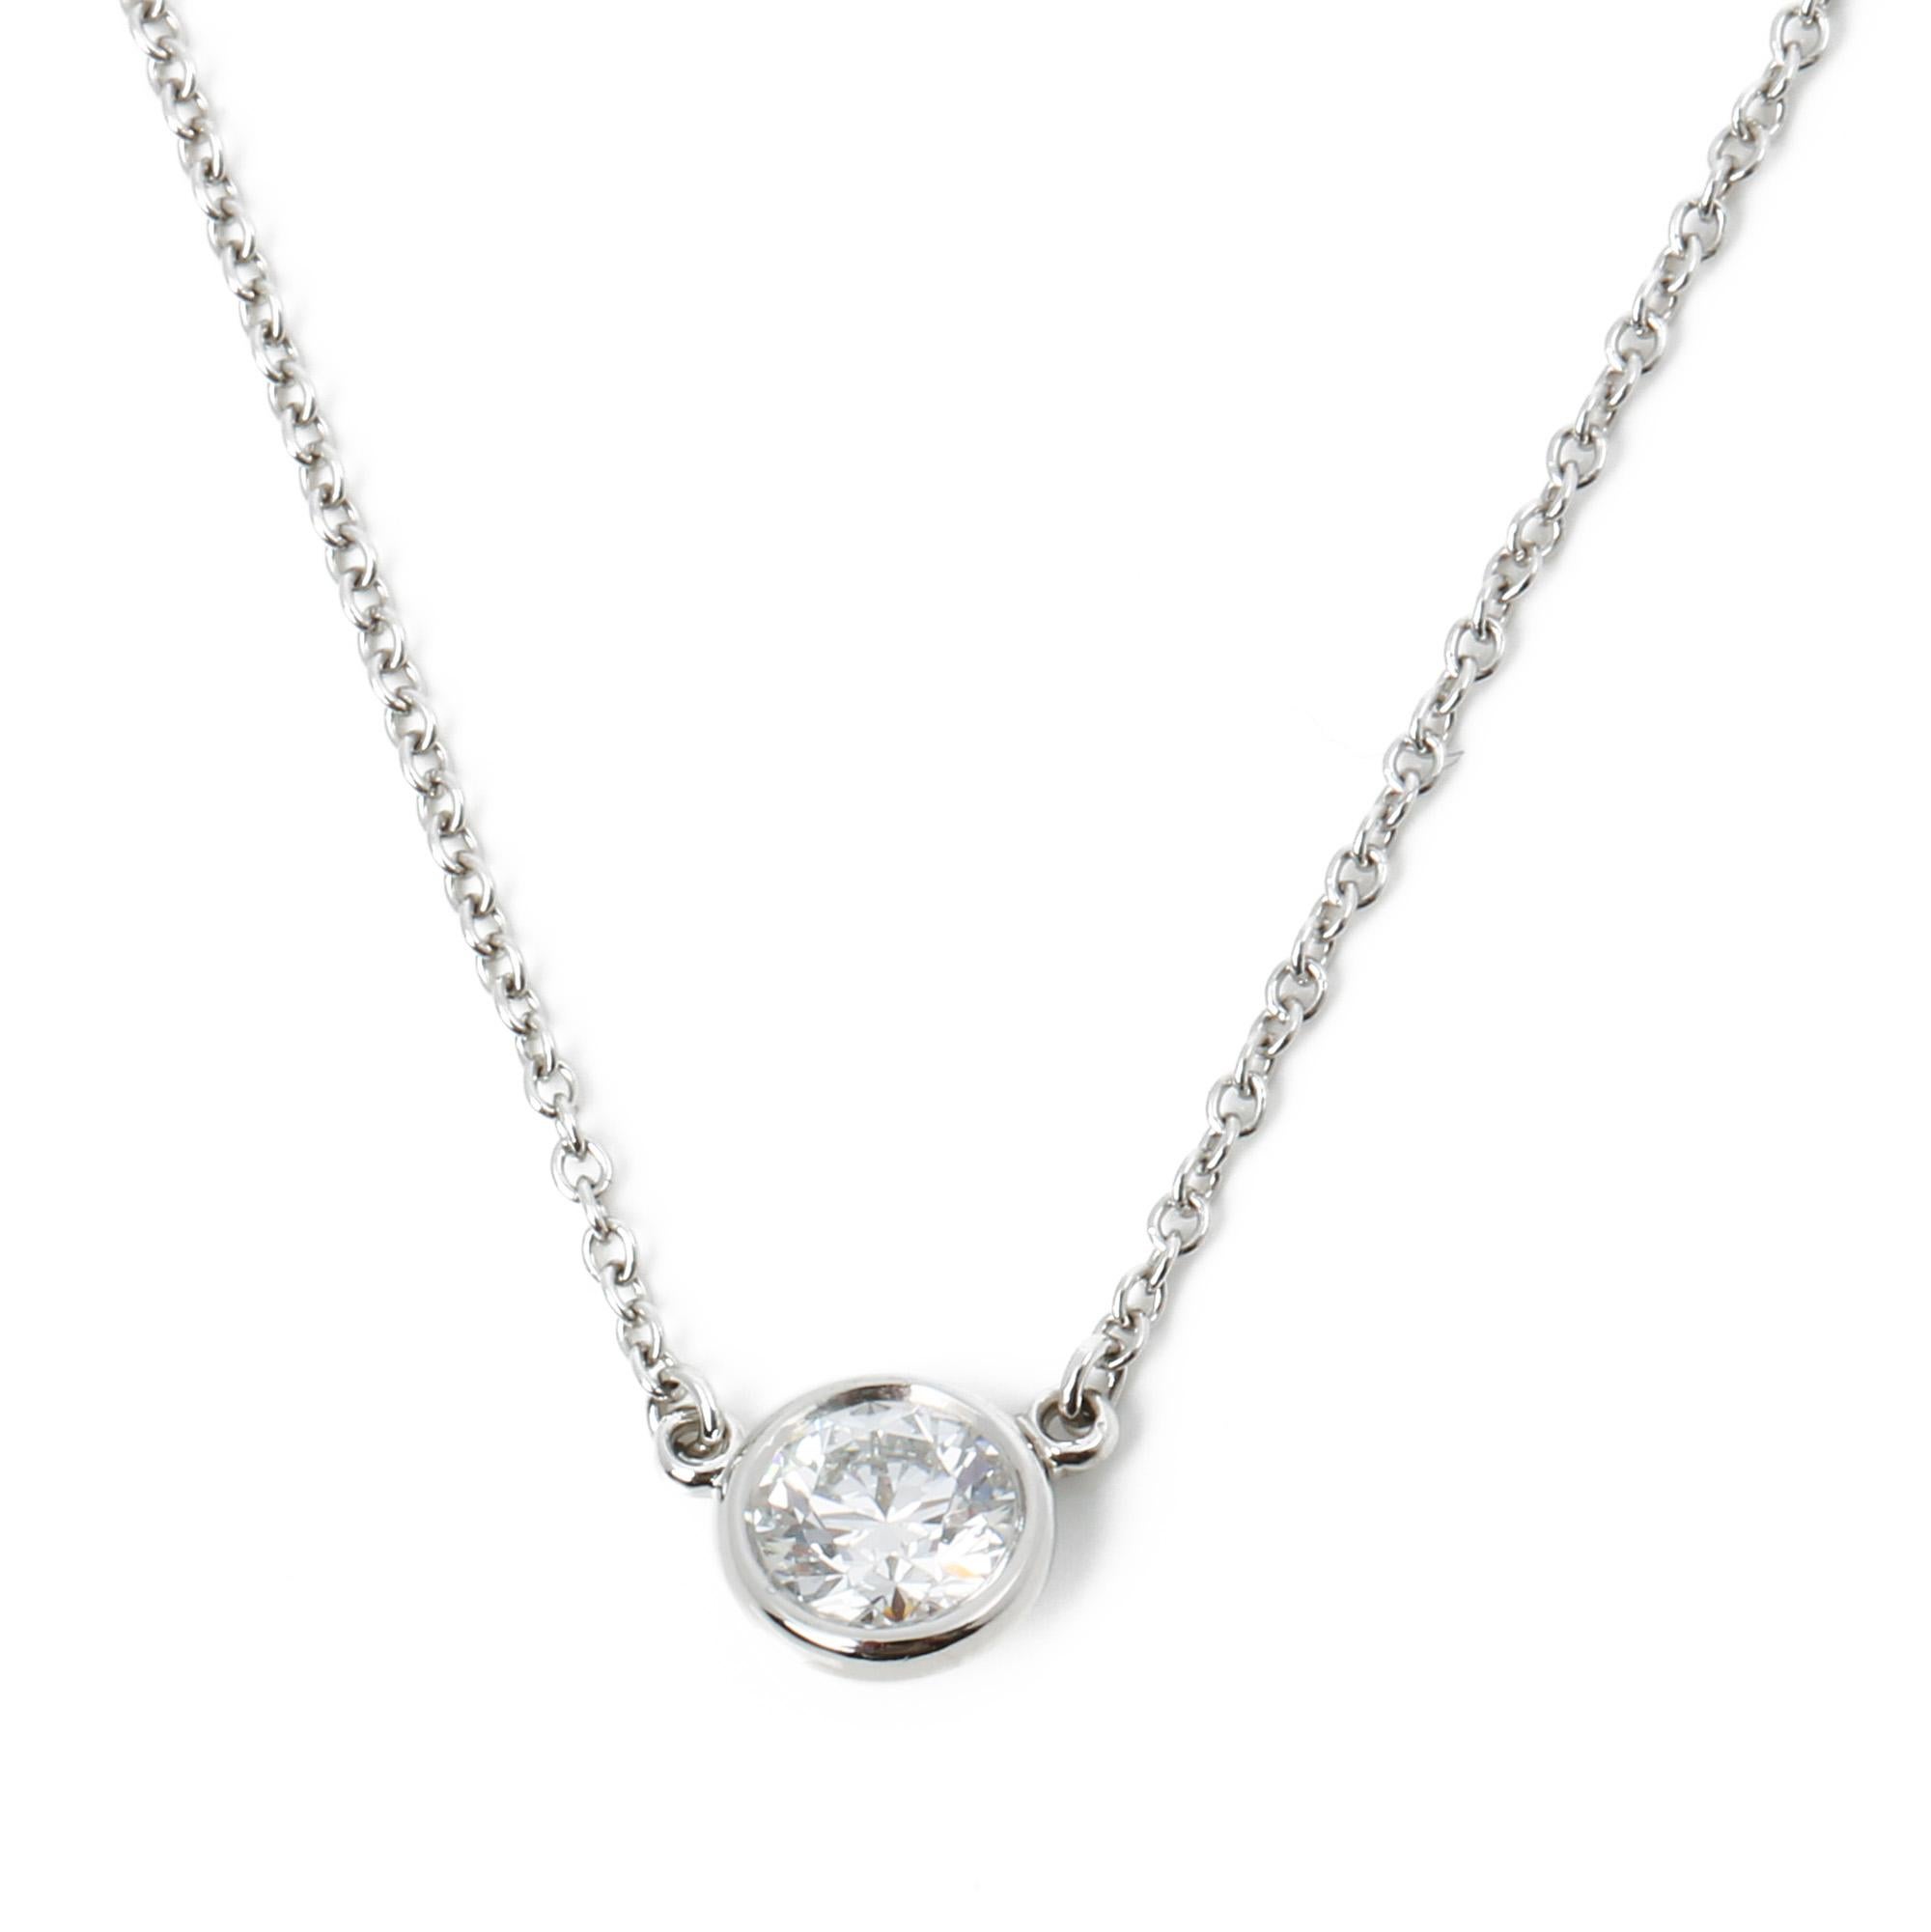 Round Cut Tiffany & Co. Diamonds by the Yard 0.35 Carat Pendant Necklace